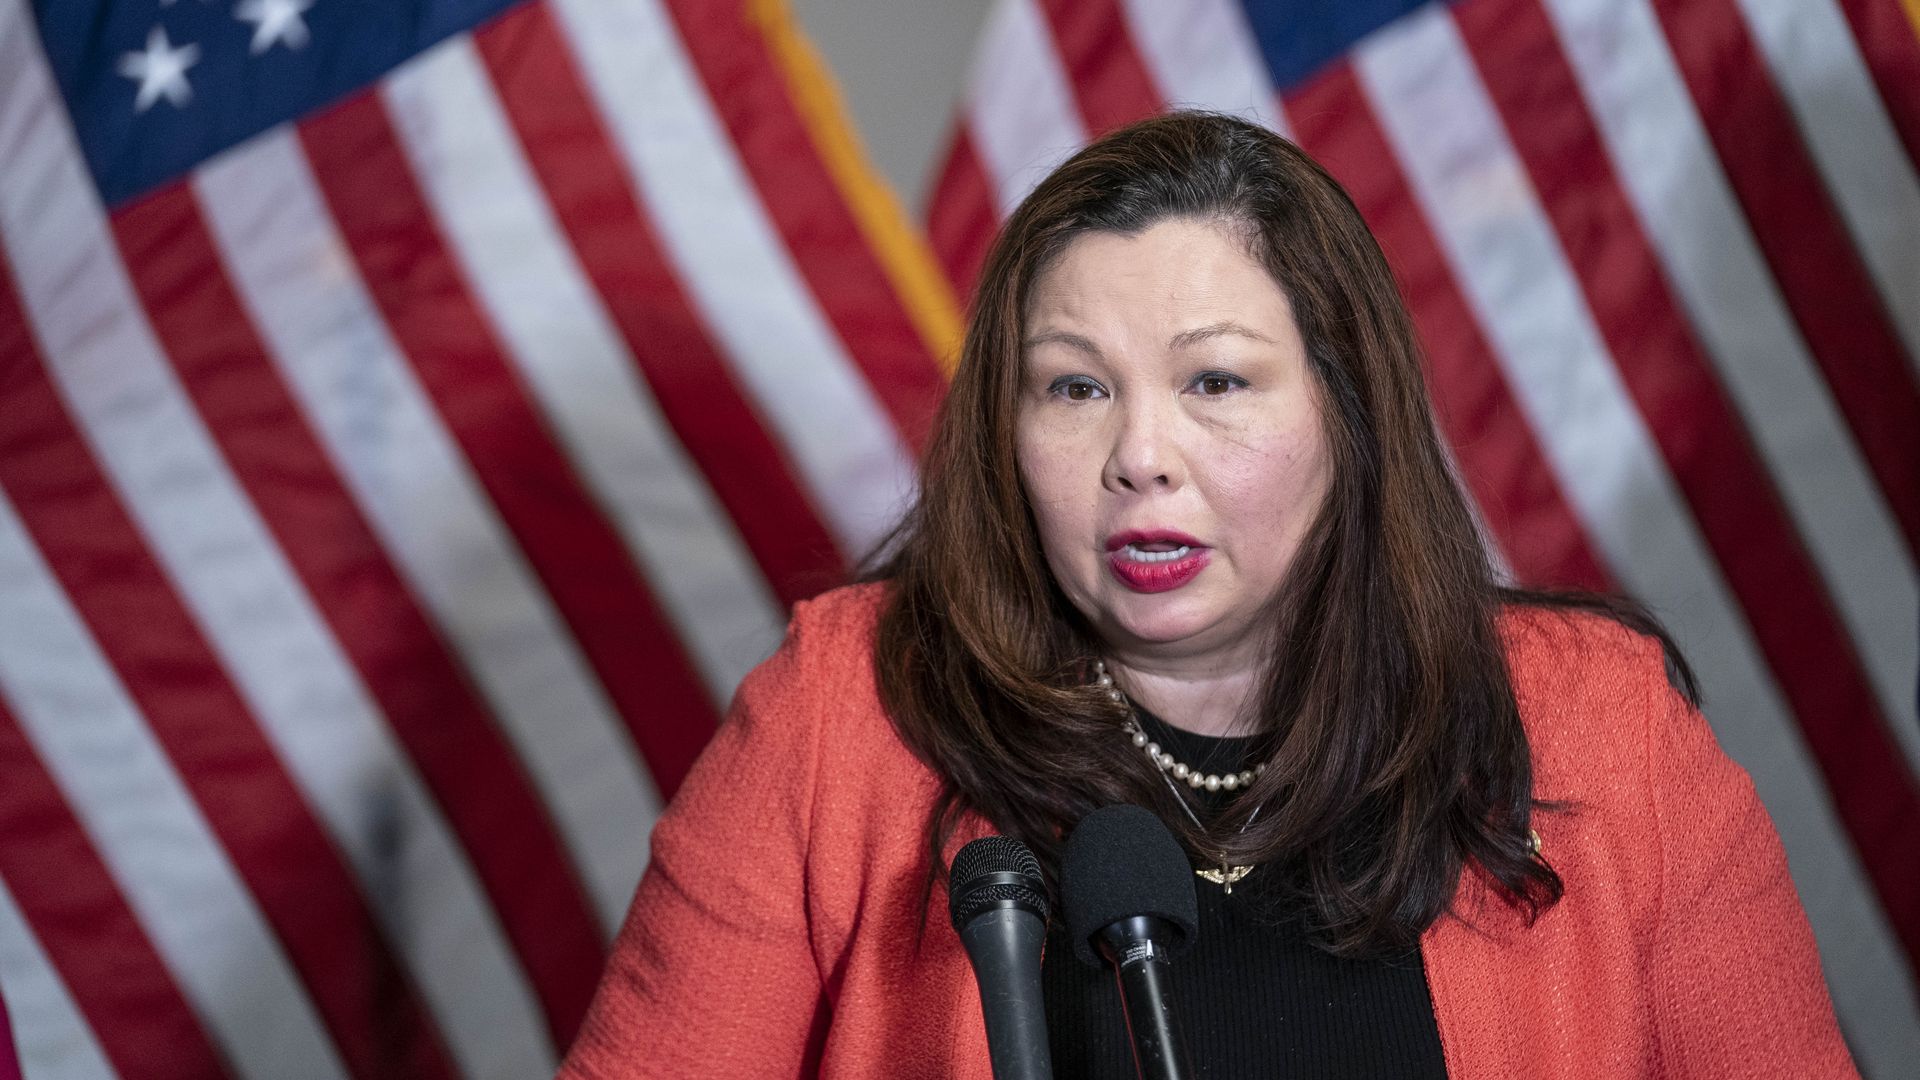 Photo of Tammy Duckworth speaking from a podium with two American flags behind her